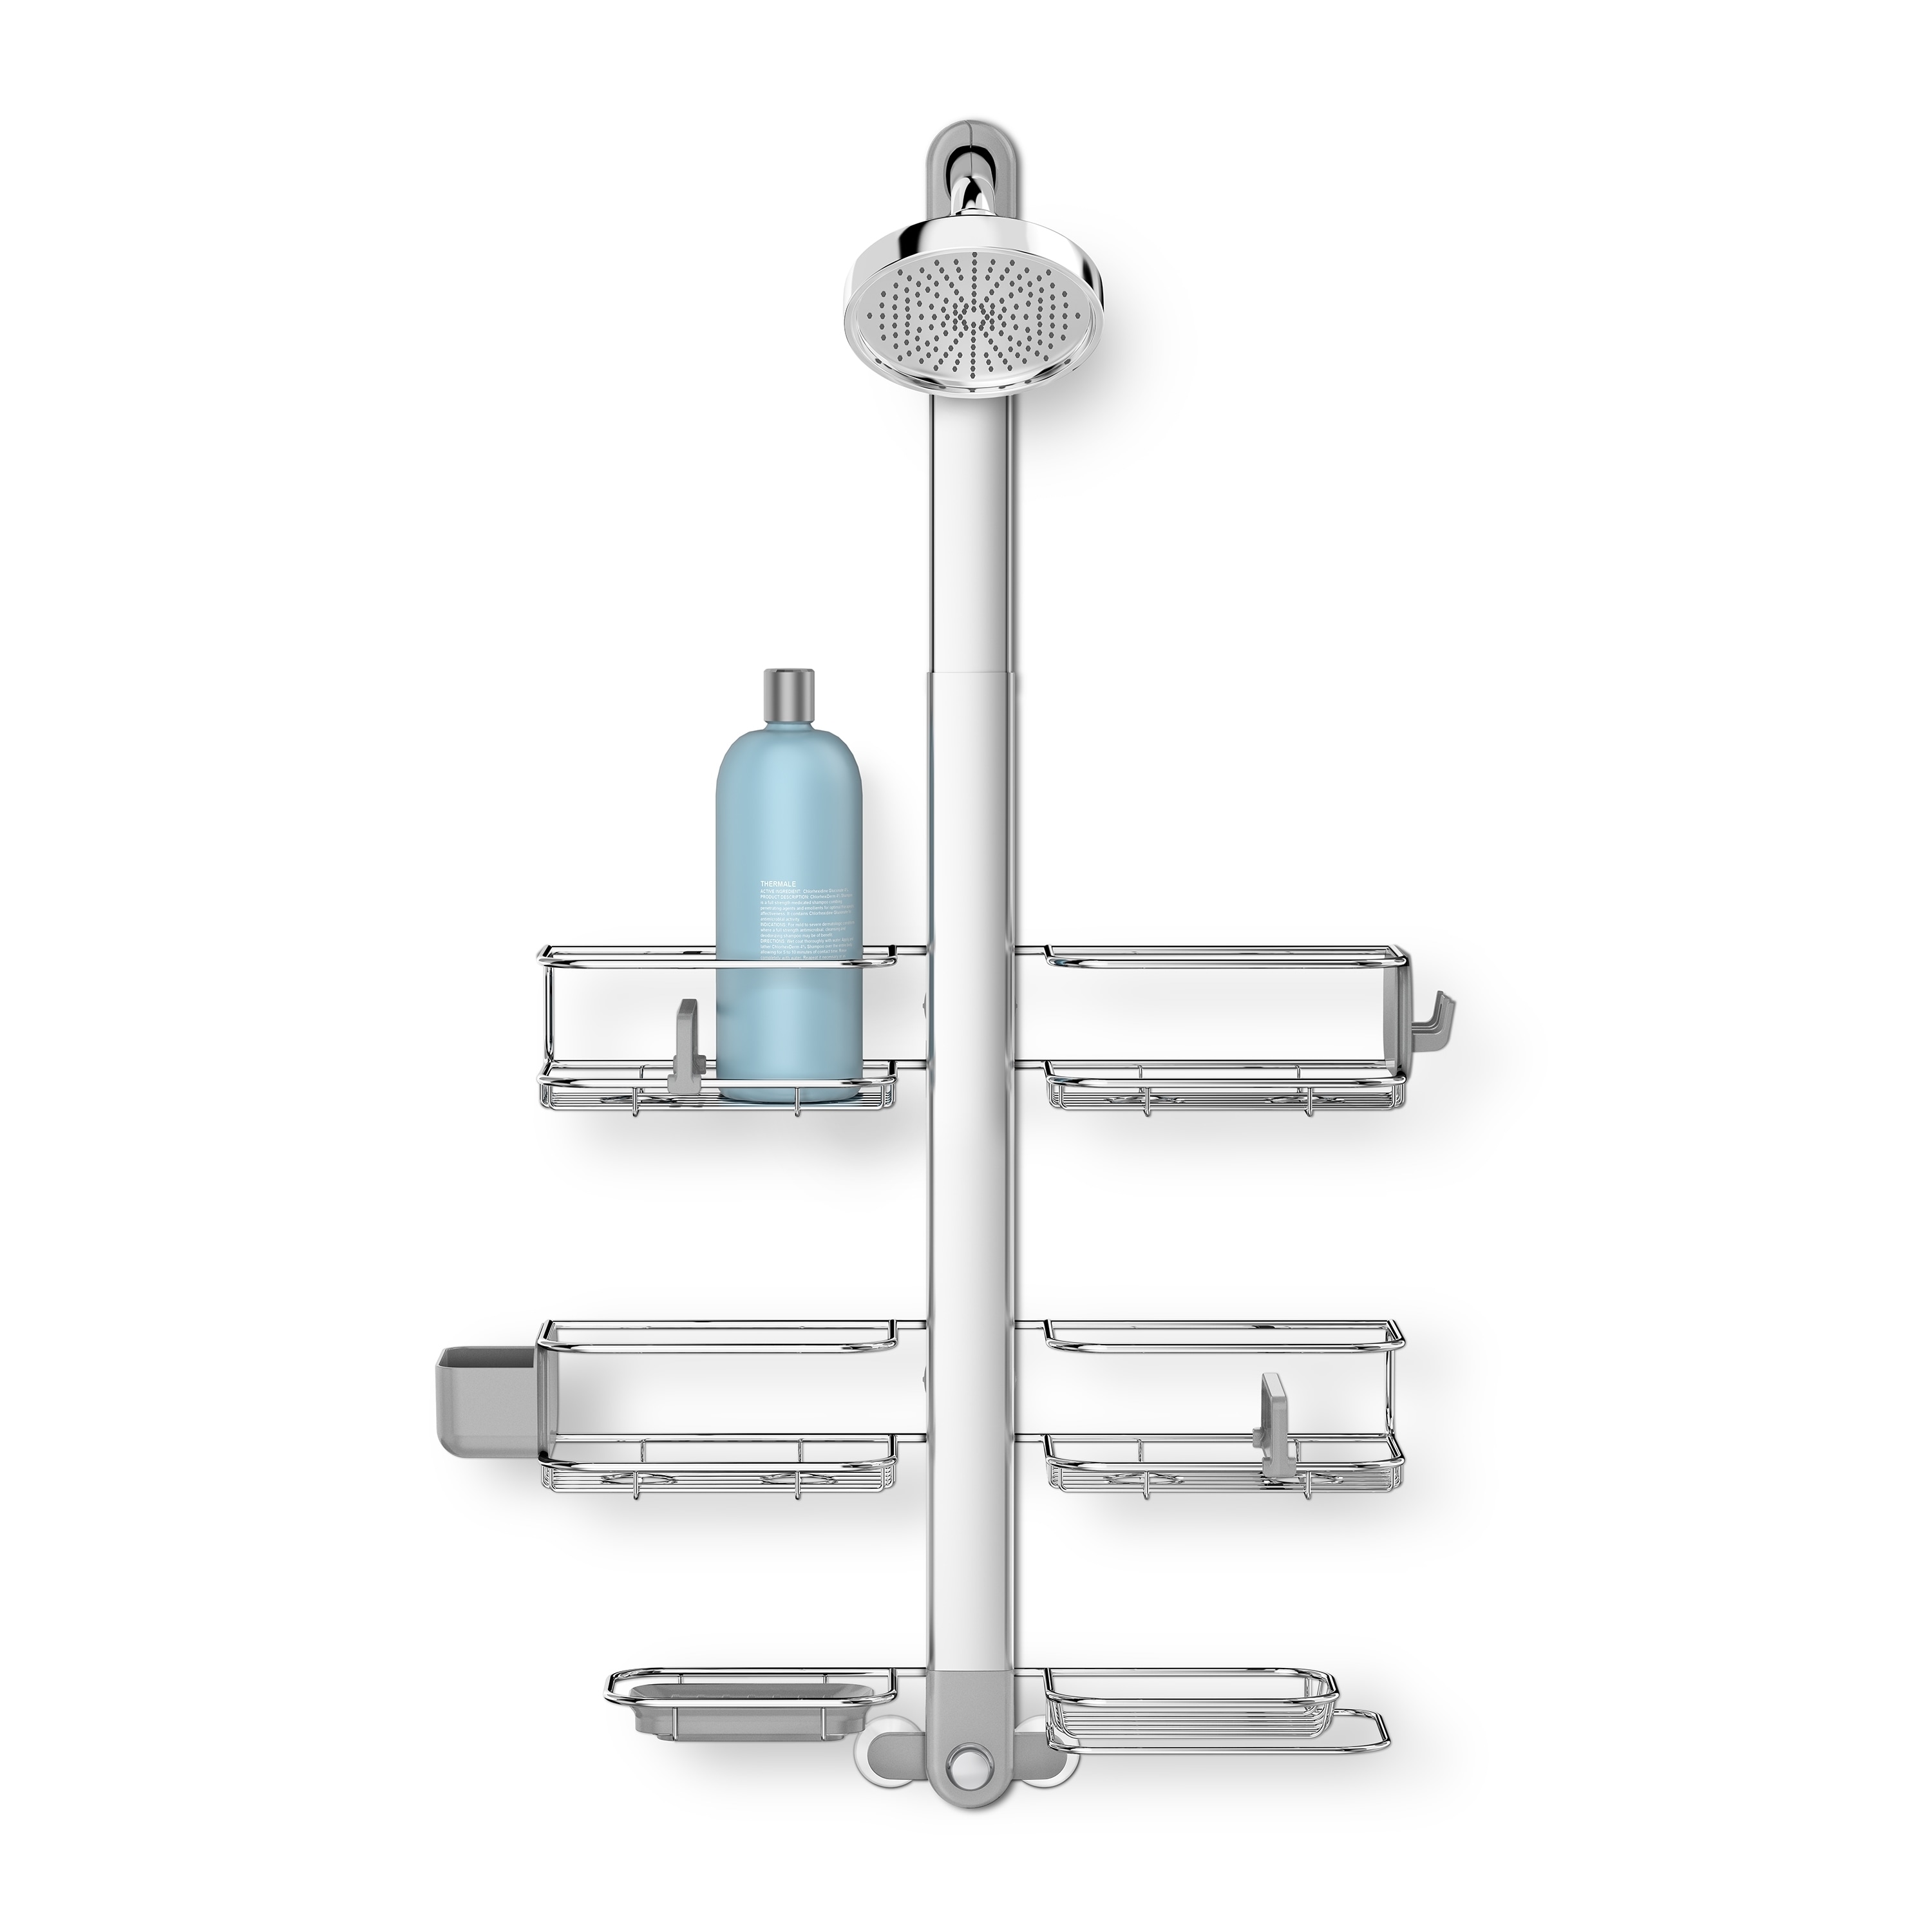 Large Corner Shower Caddy - Antimicrobial Caddy